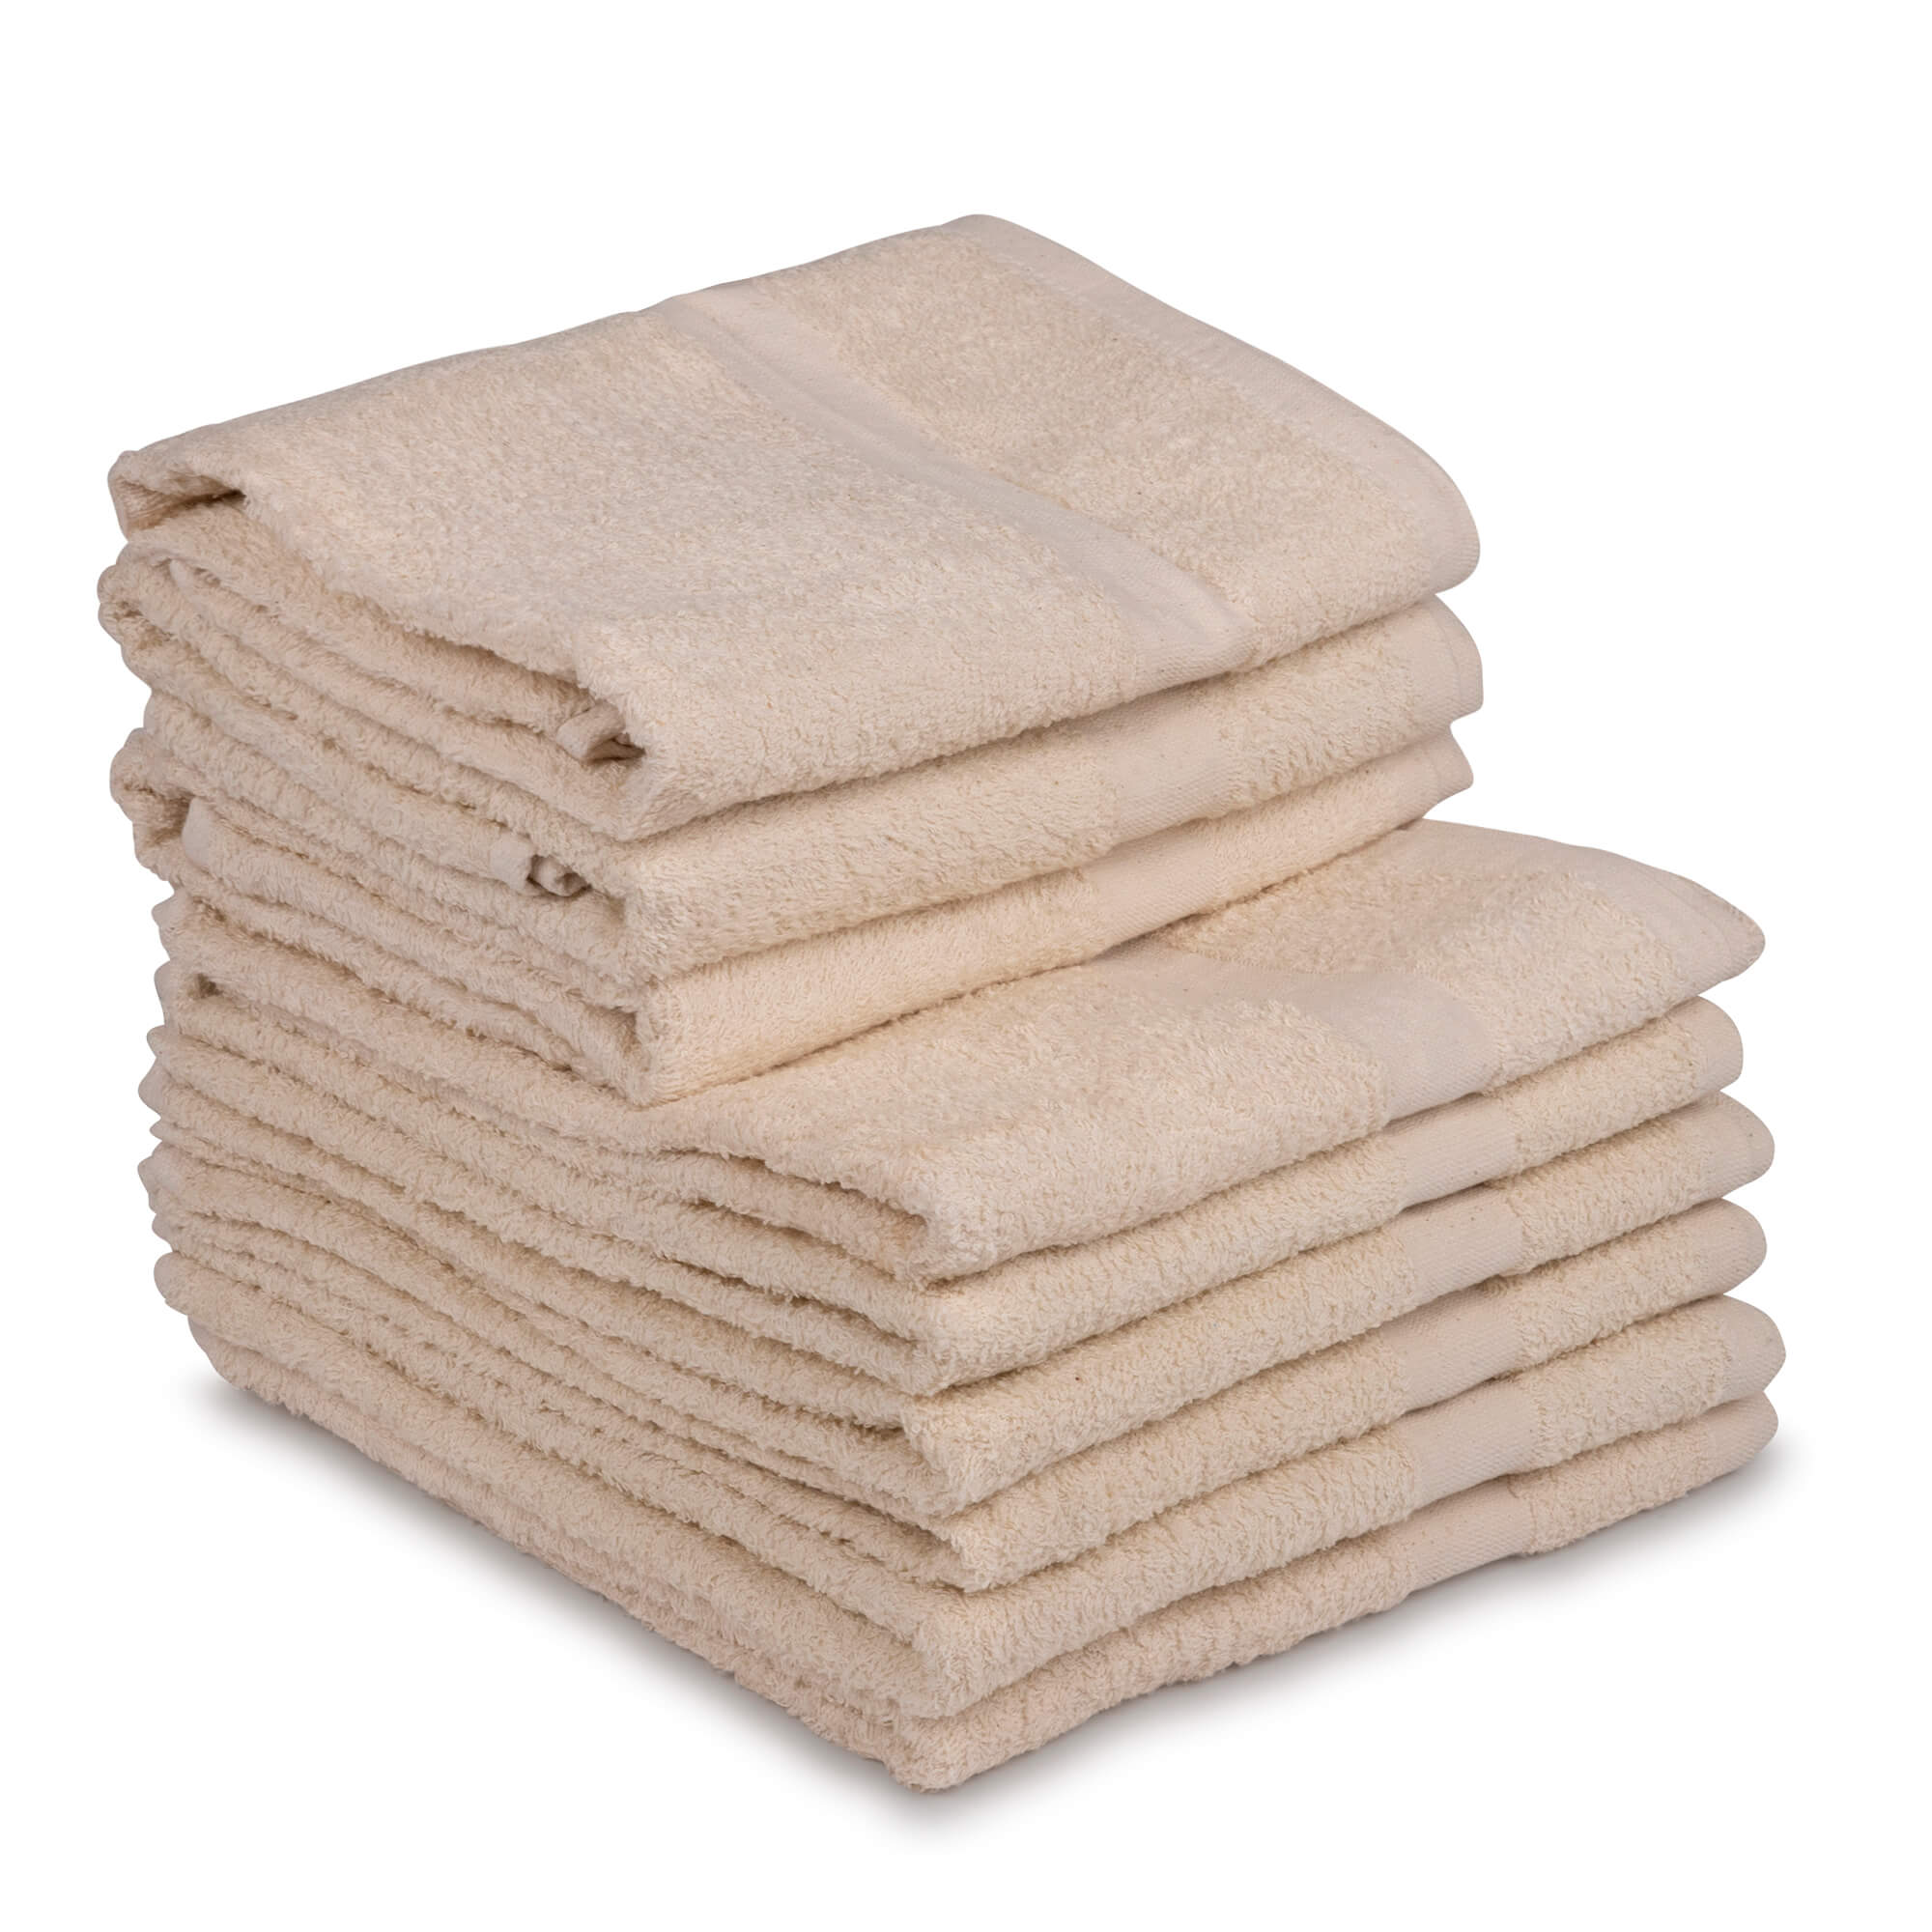 Colored Towels & Wash Cloths - 10 Single